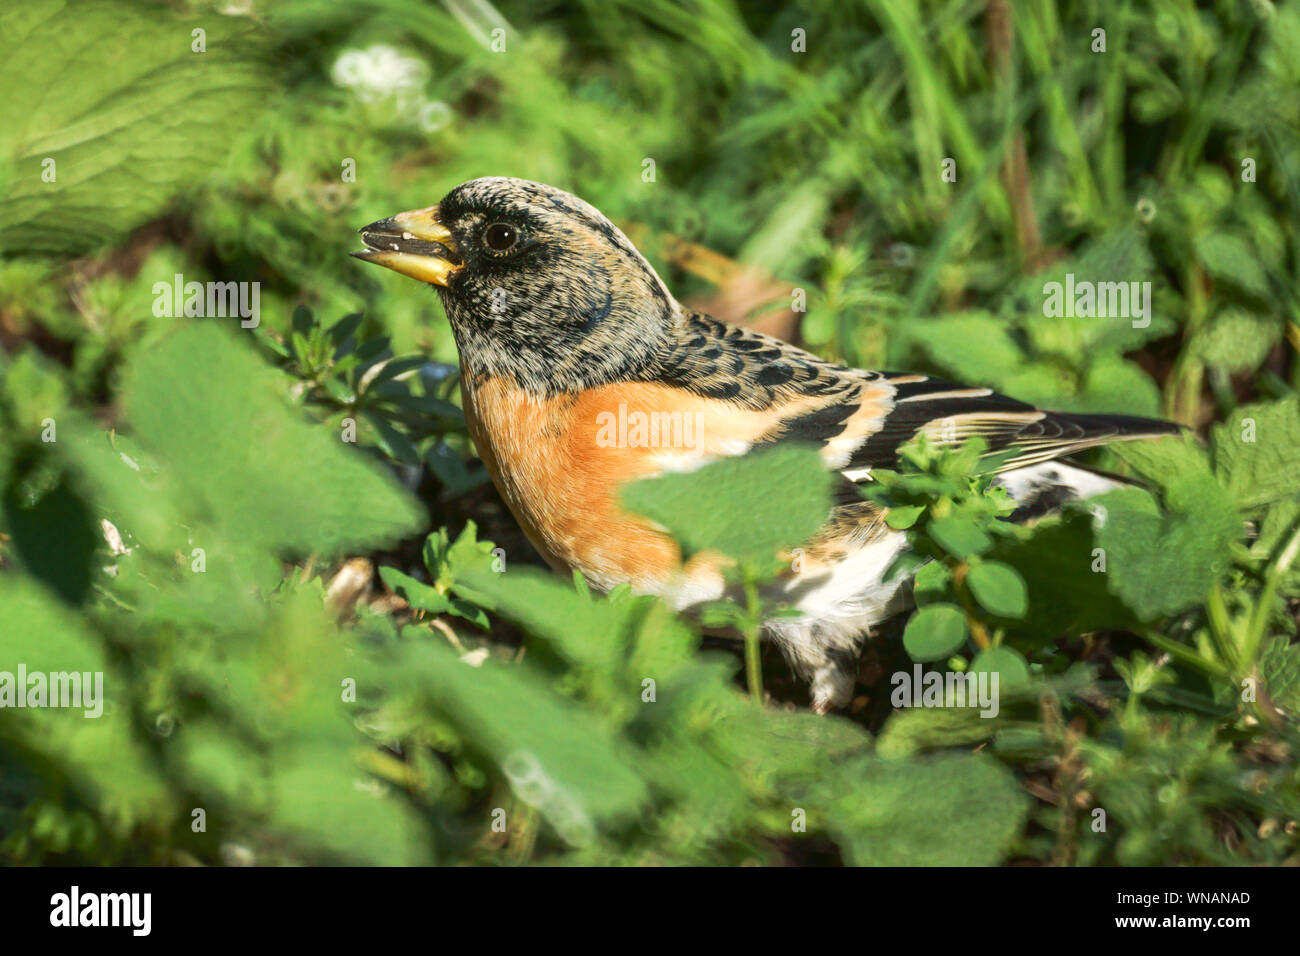 Brambling (Fringilla montifringilla).Male photographed in January in the garden.Brought into camera range with food.Southwest France Stock Photo